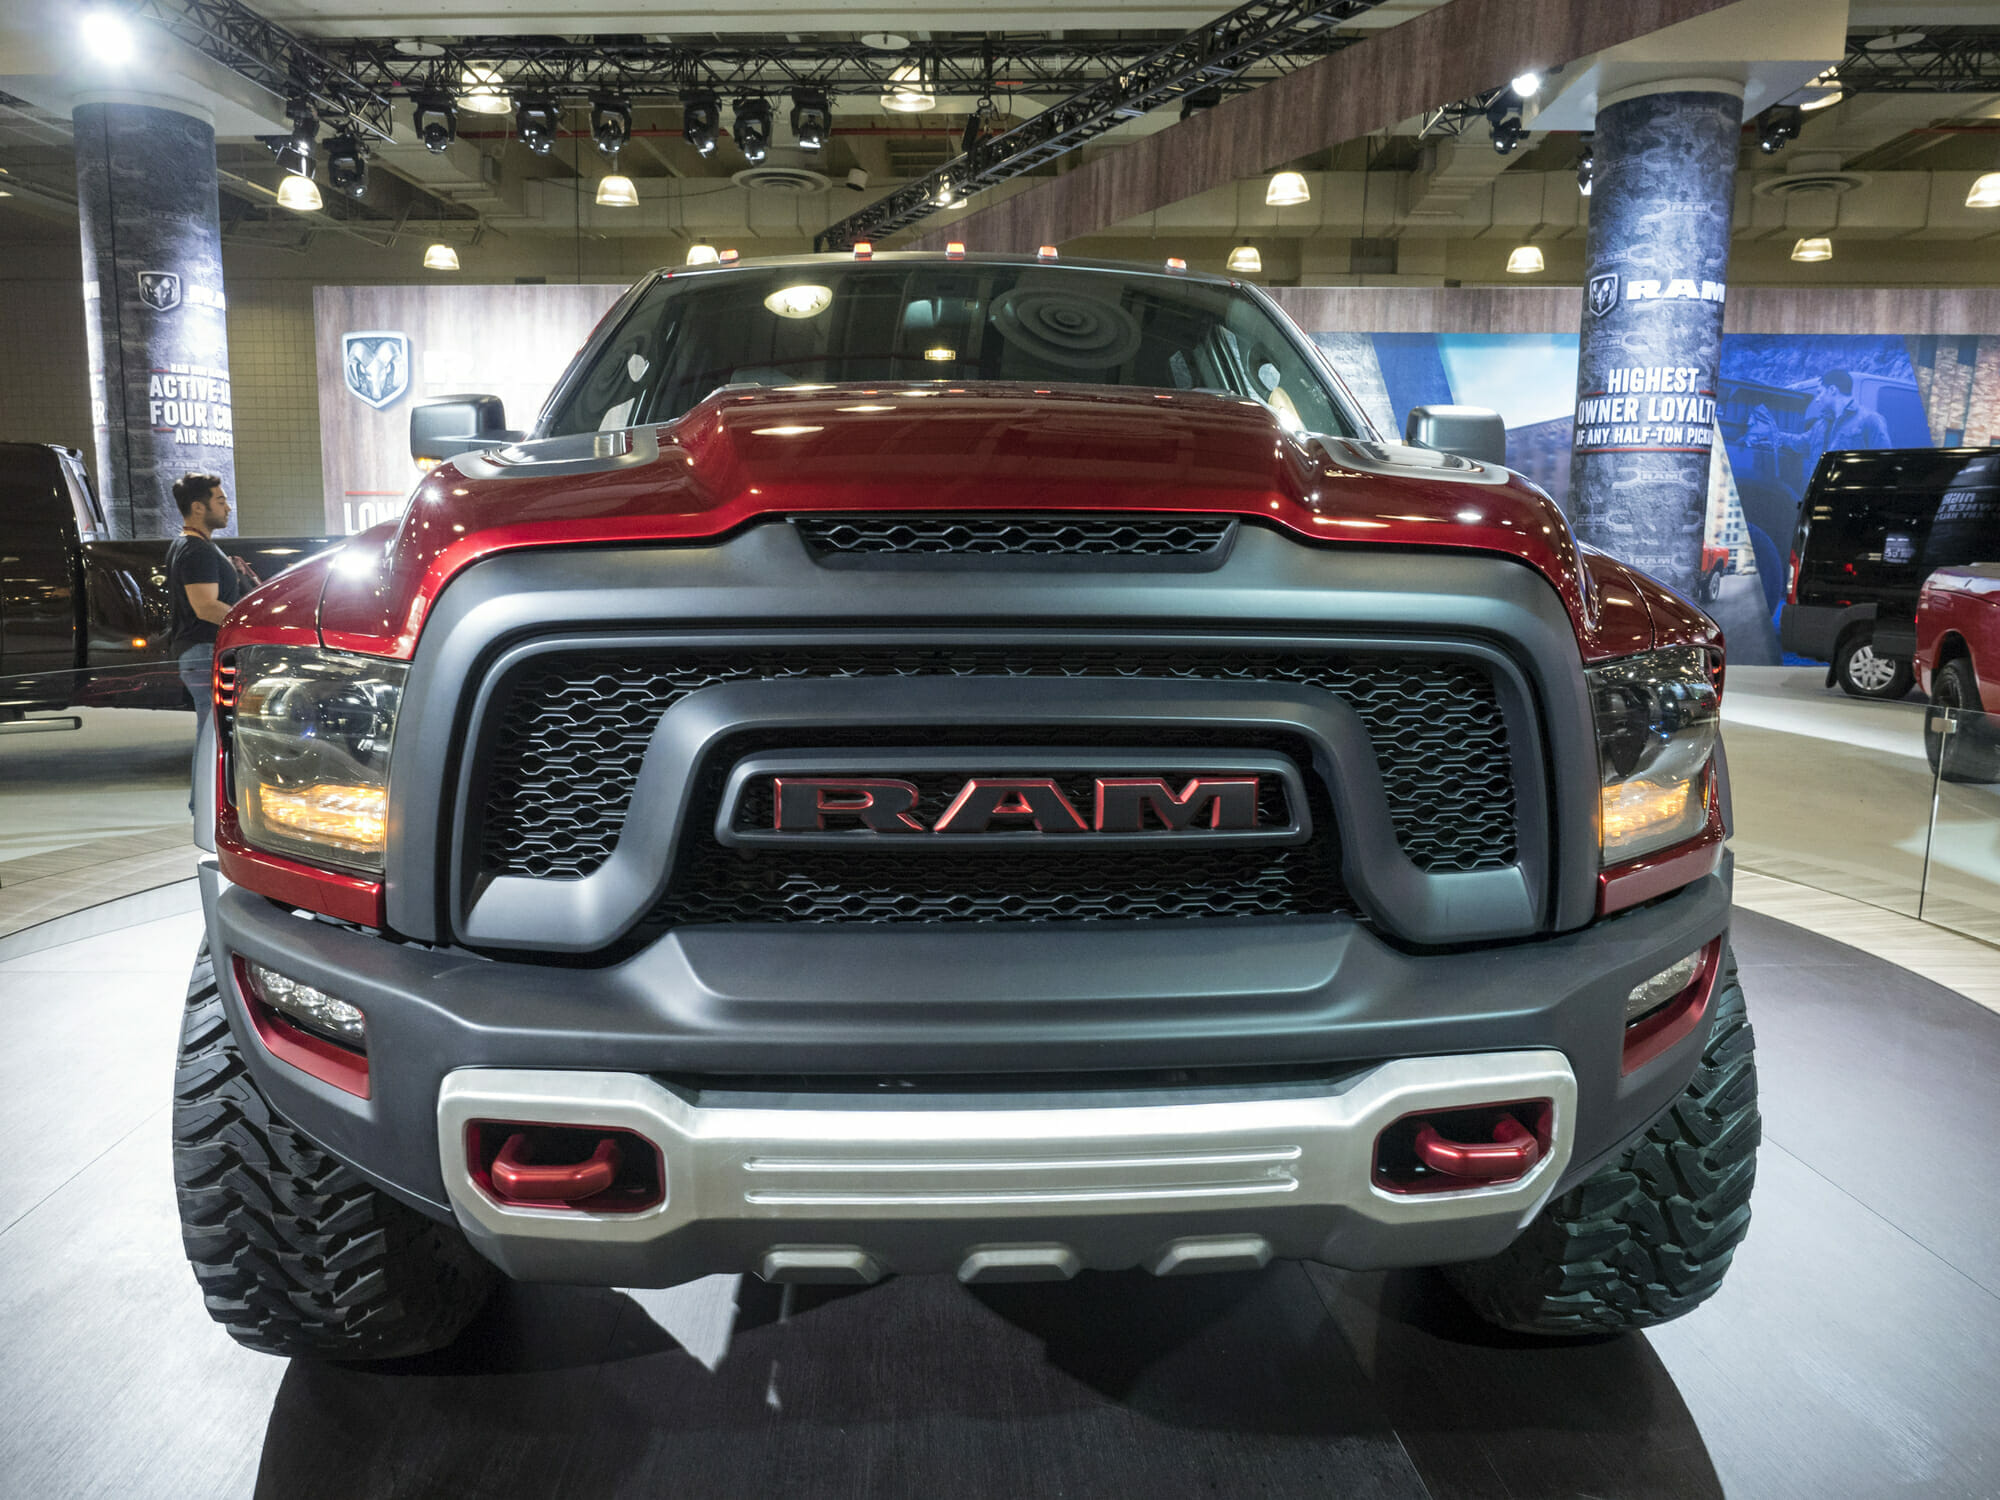 2020 Ram 1500 Rebel: Power and Personality